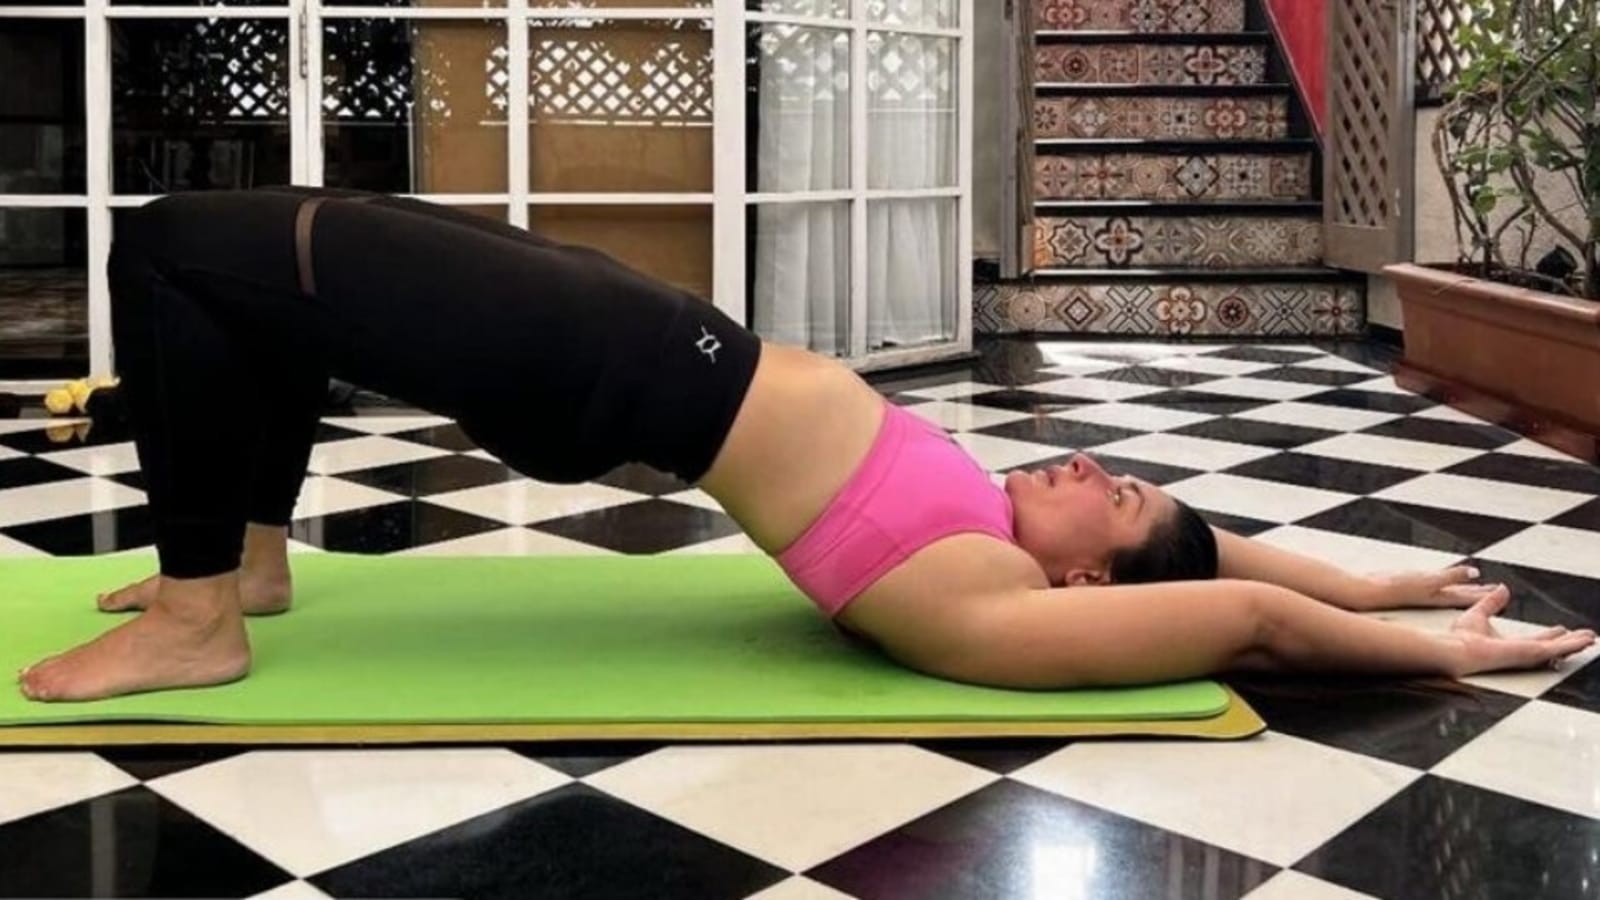 Kareena Kapoor’s trainer shares 6 Yoga asanas to beat stress, anxiety and regulate thyroid gland: Read details